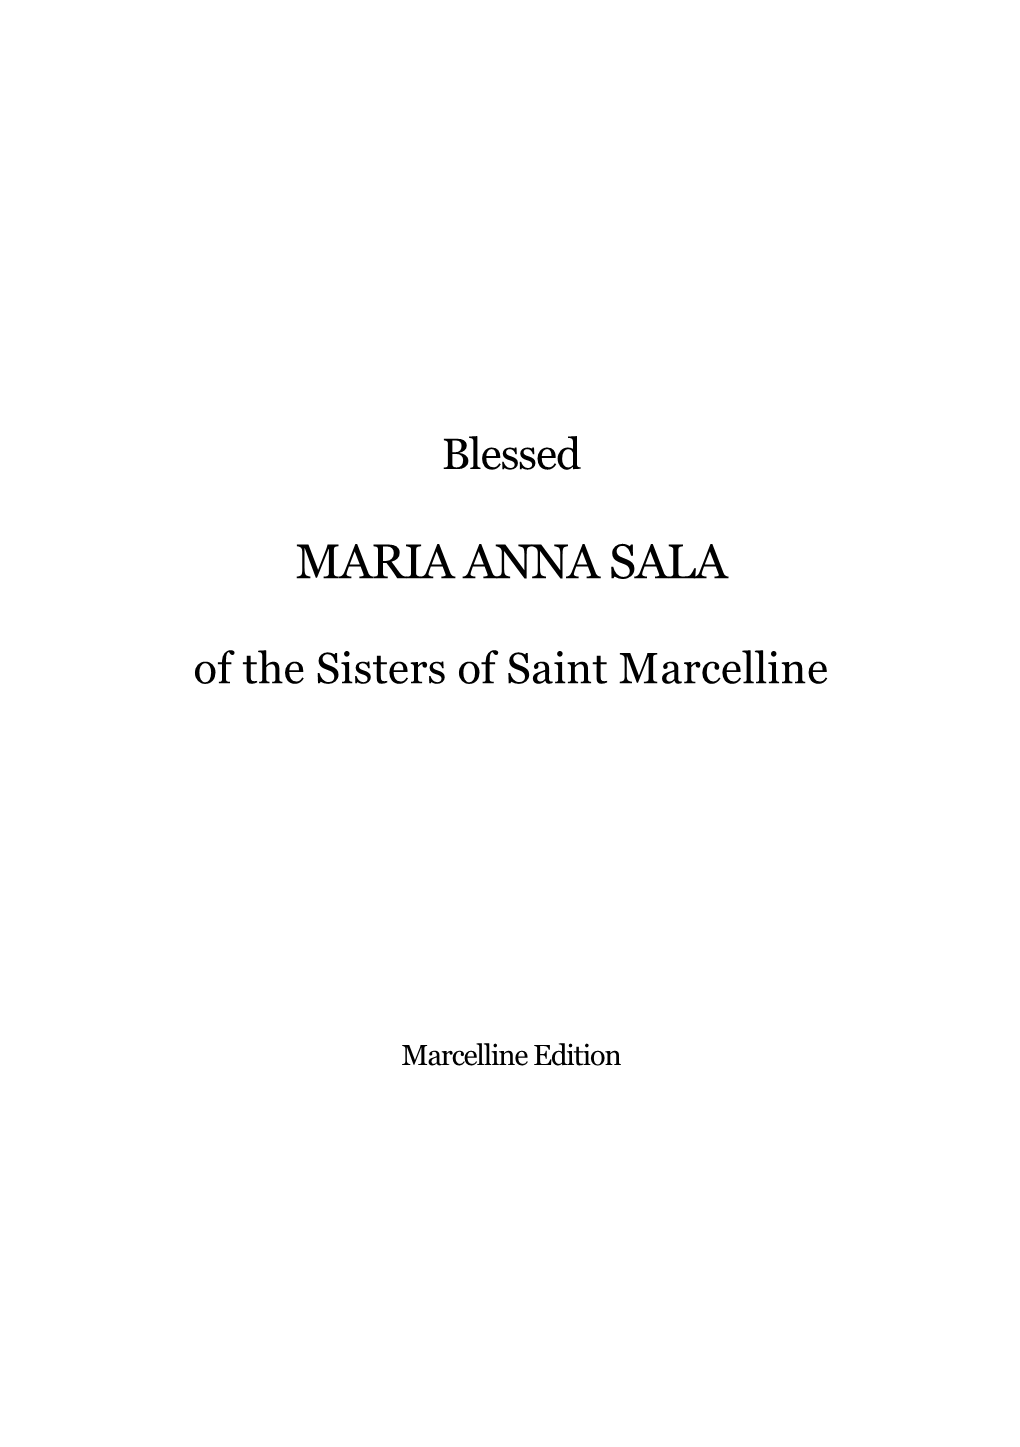 MARIA ANNA SALA of the Sisters of Saint Marcelline